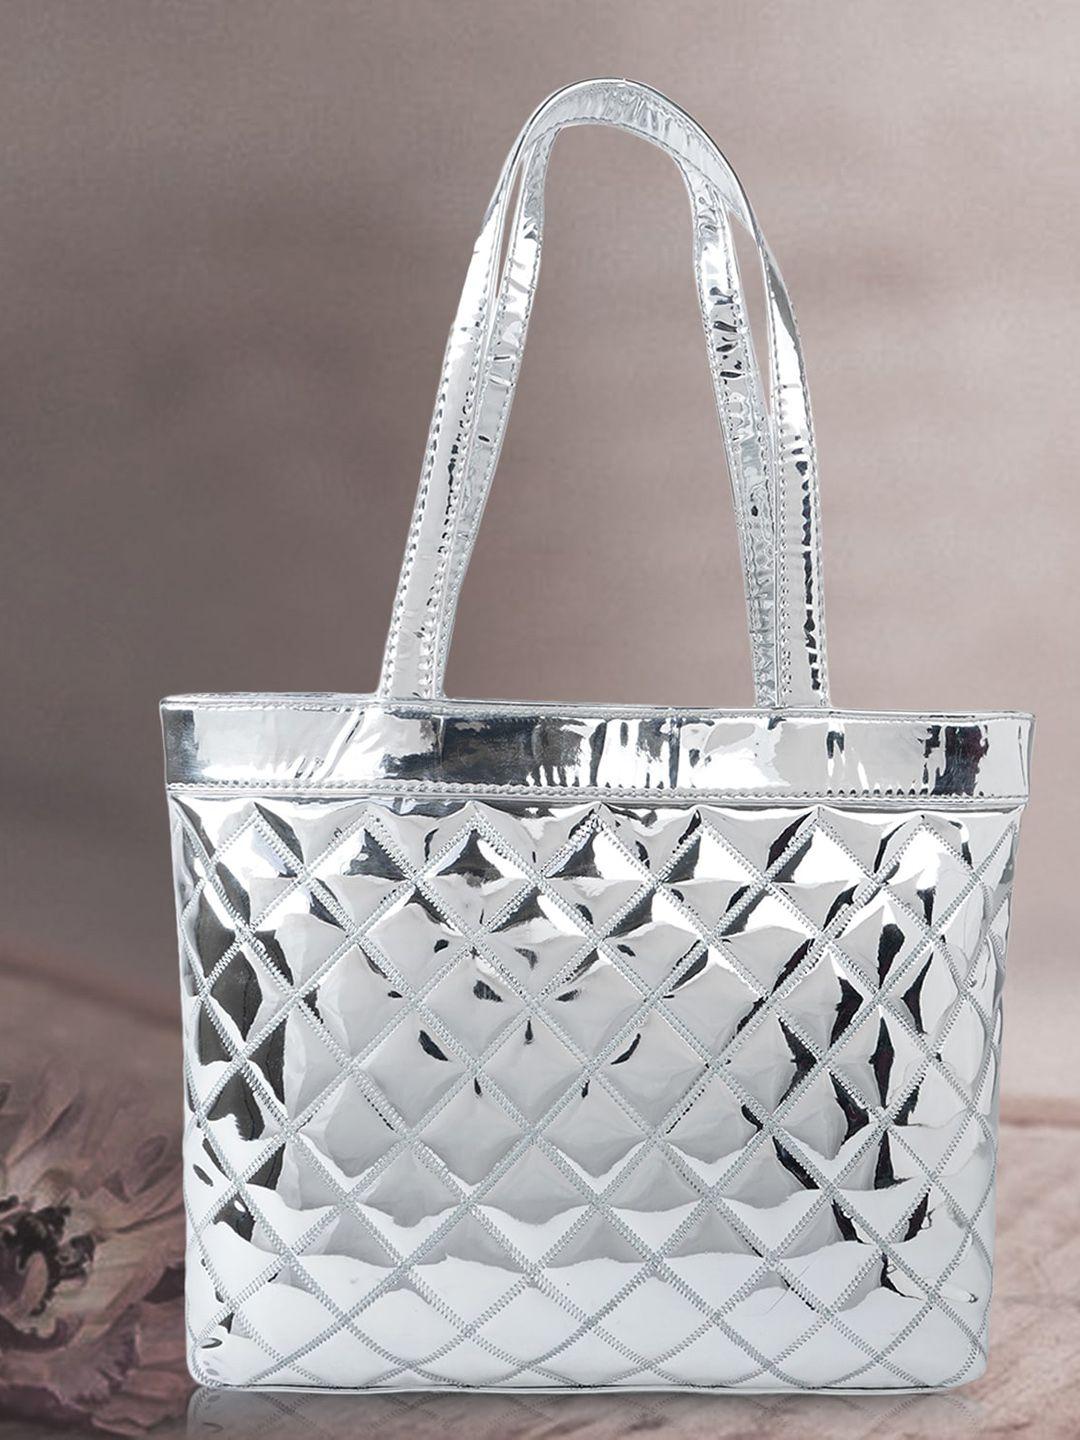 yoyowing silver-toned tote bag with quilted